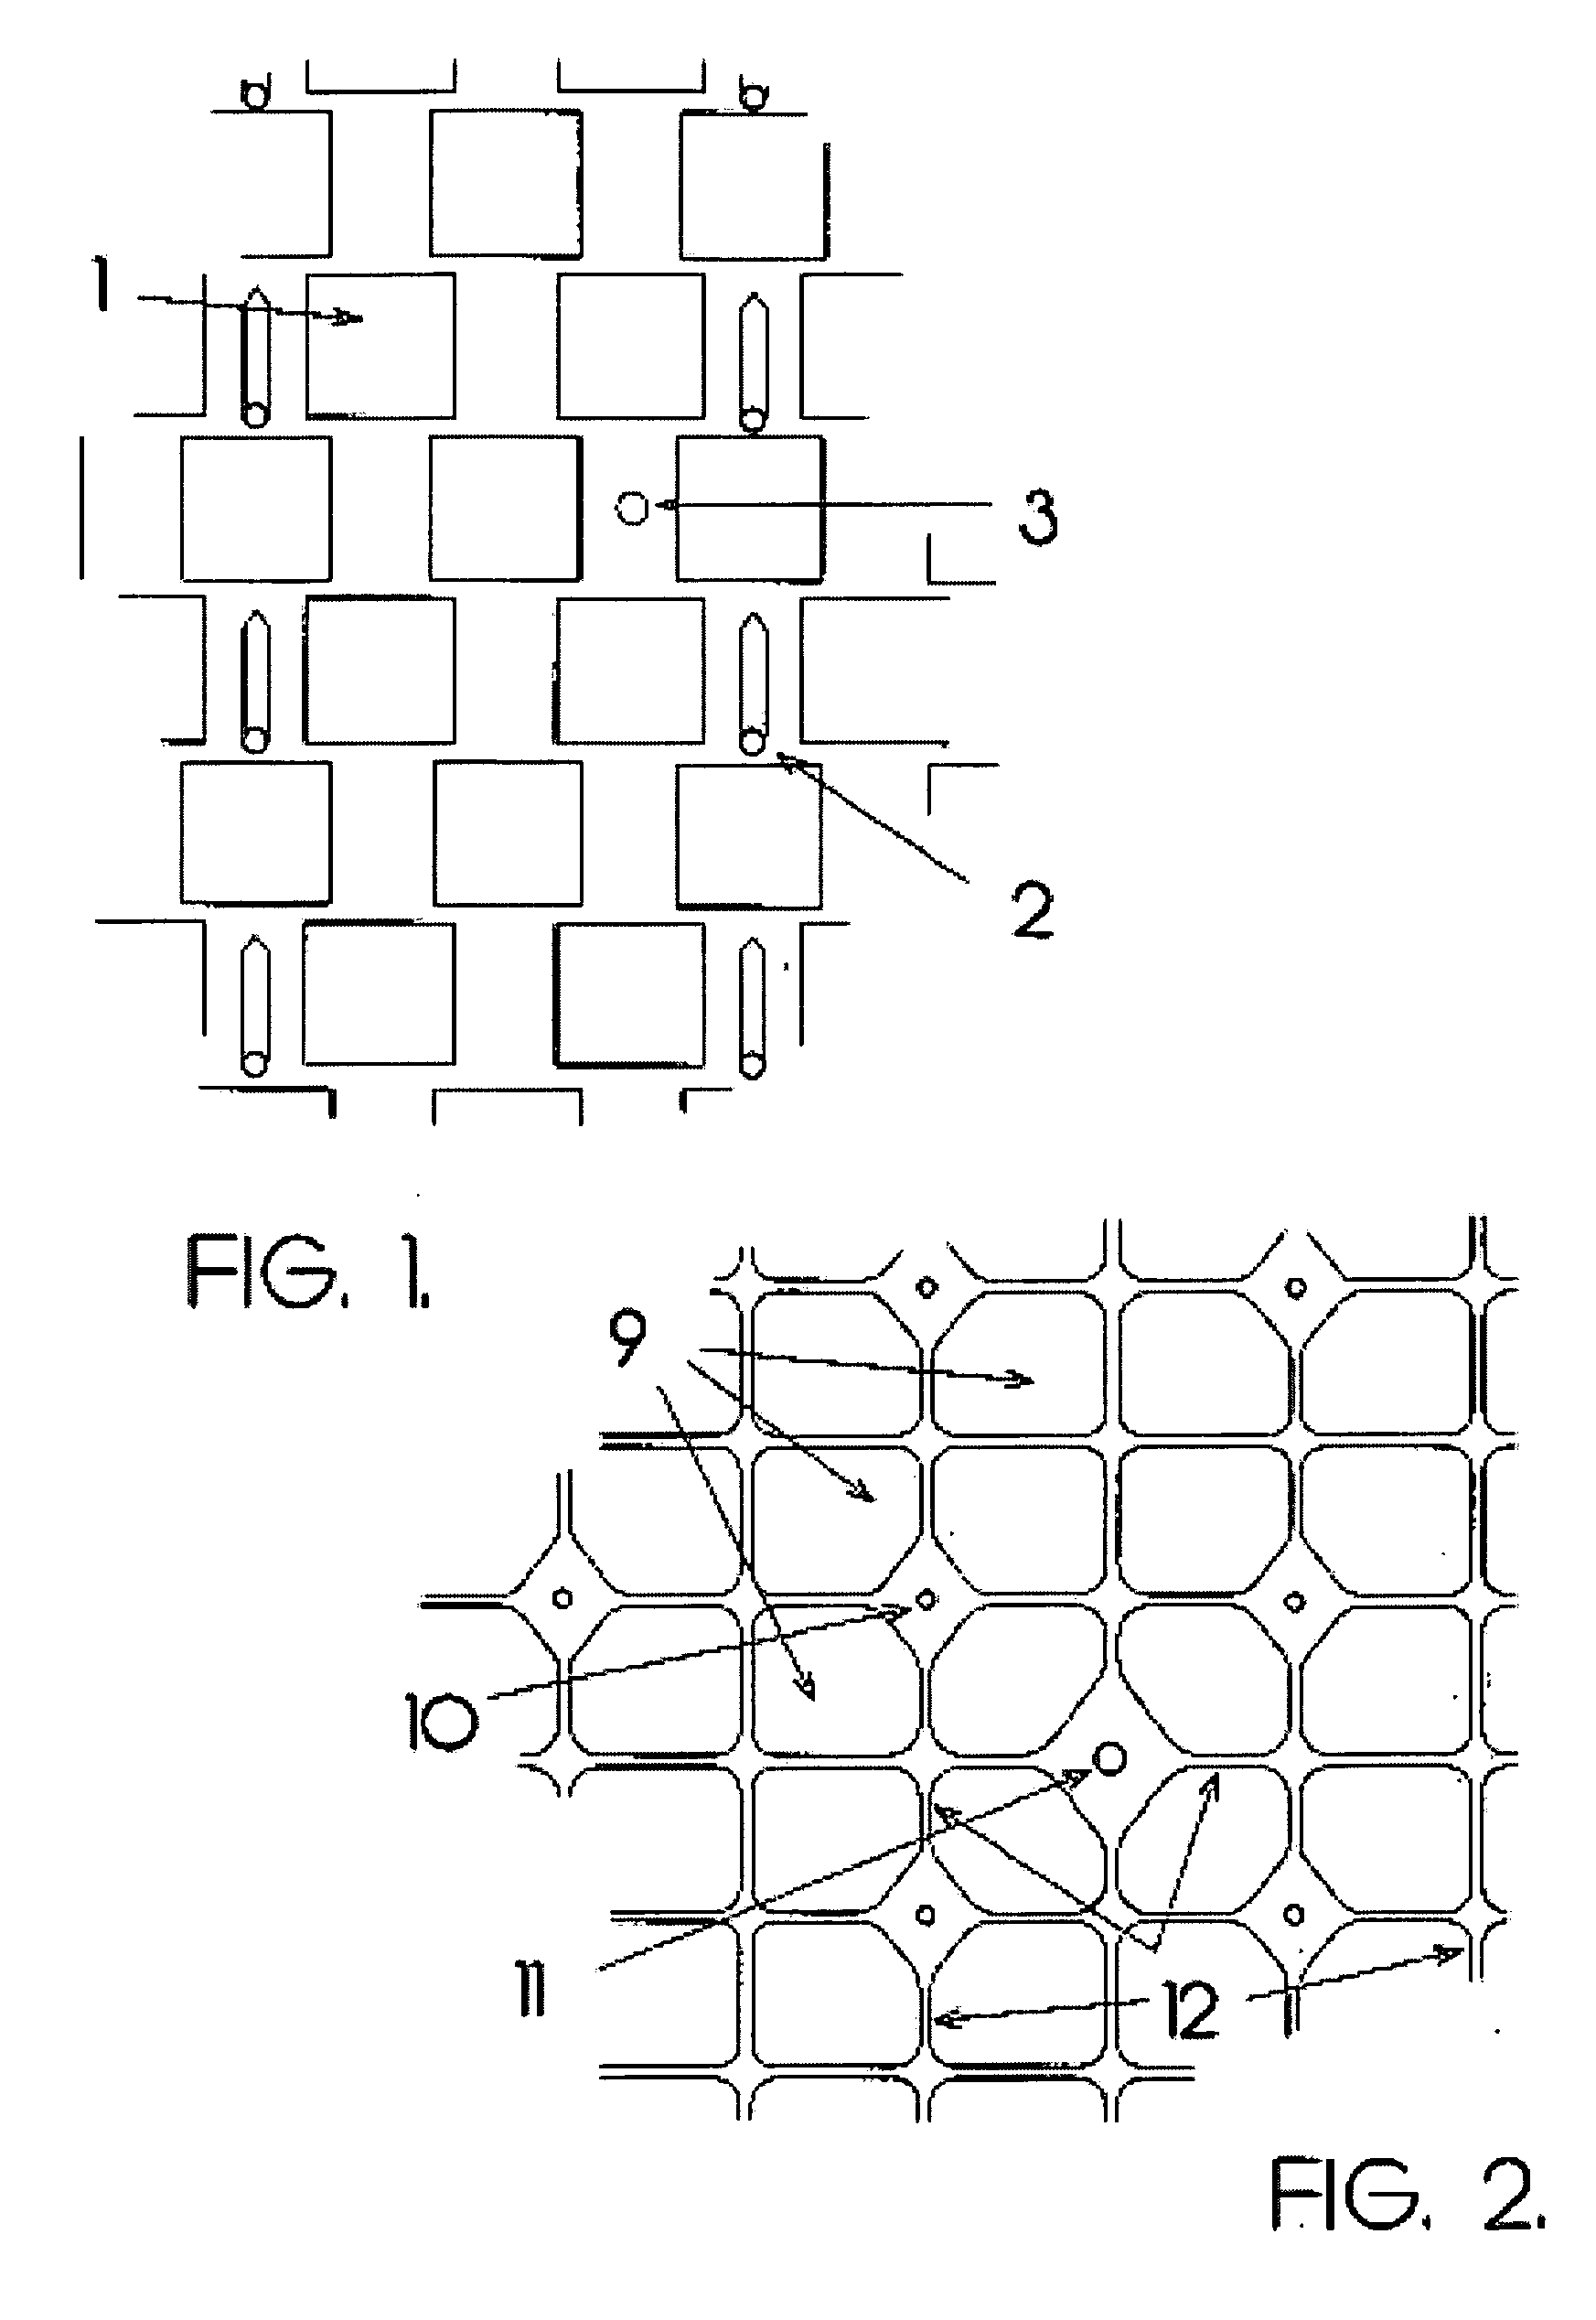 Device and method to provide air circulation space proximate to insulation material